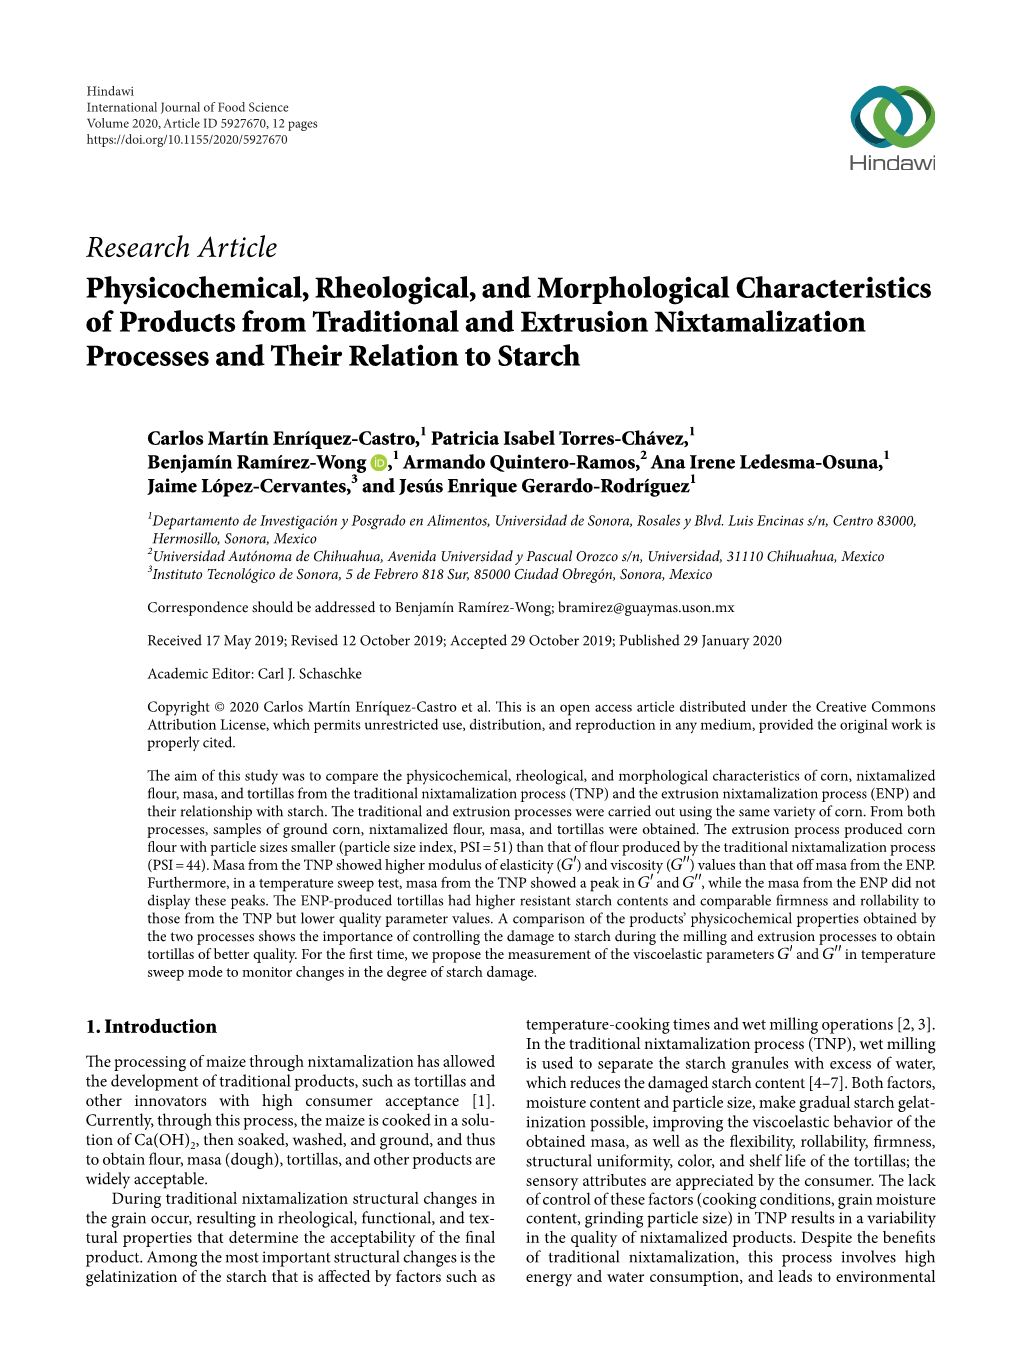 Physicochemical, Rheological, and Morphological Characteristics of Products from Traditional and Extrusion Nixtamalization Processes and Their Relation to Starch